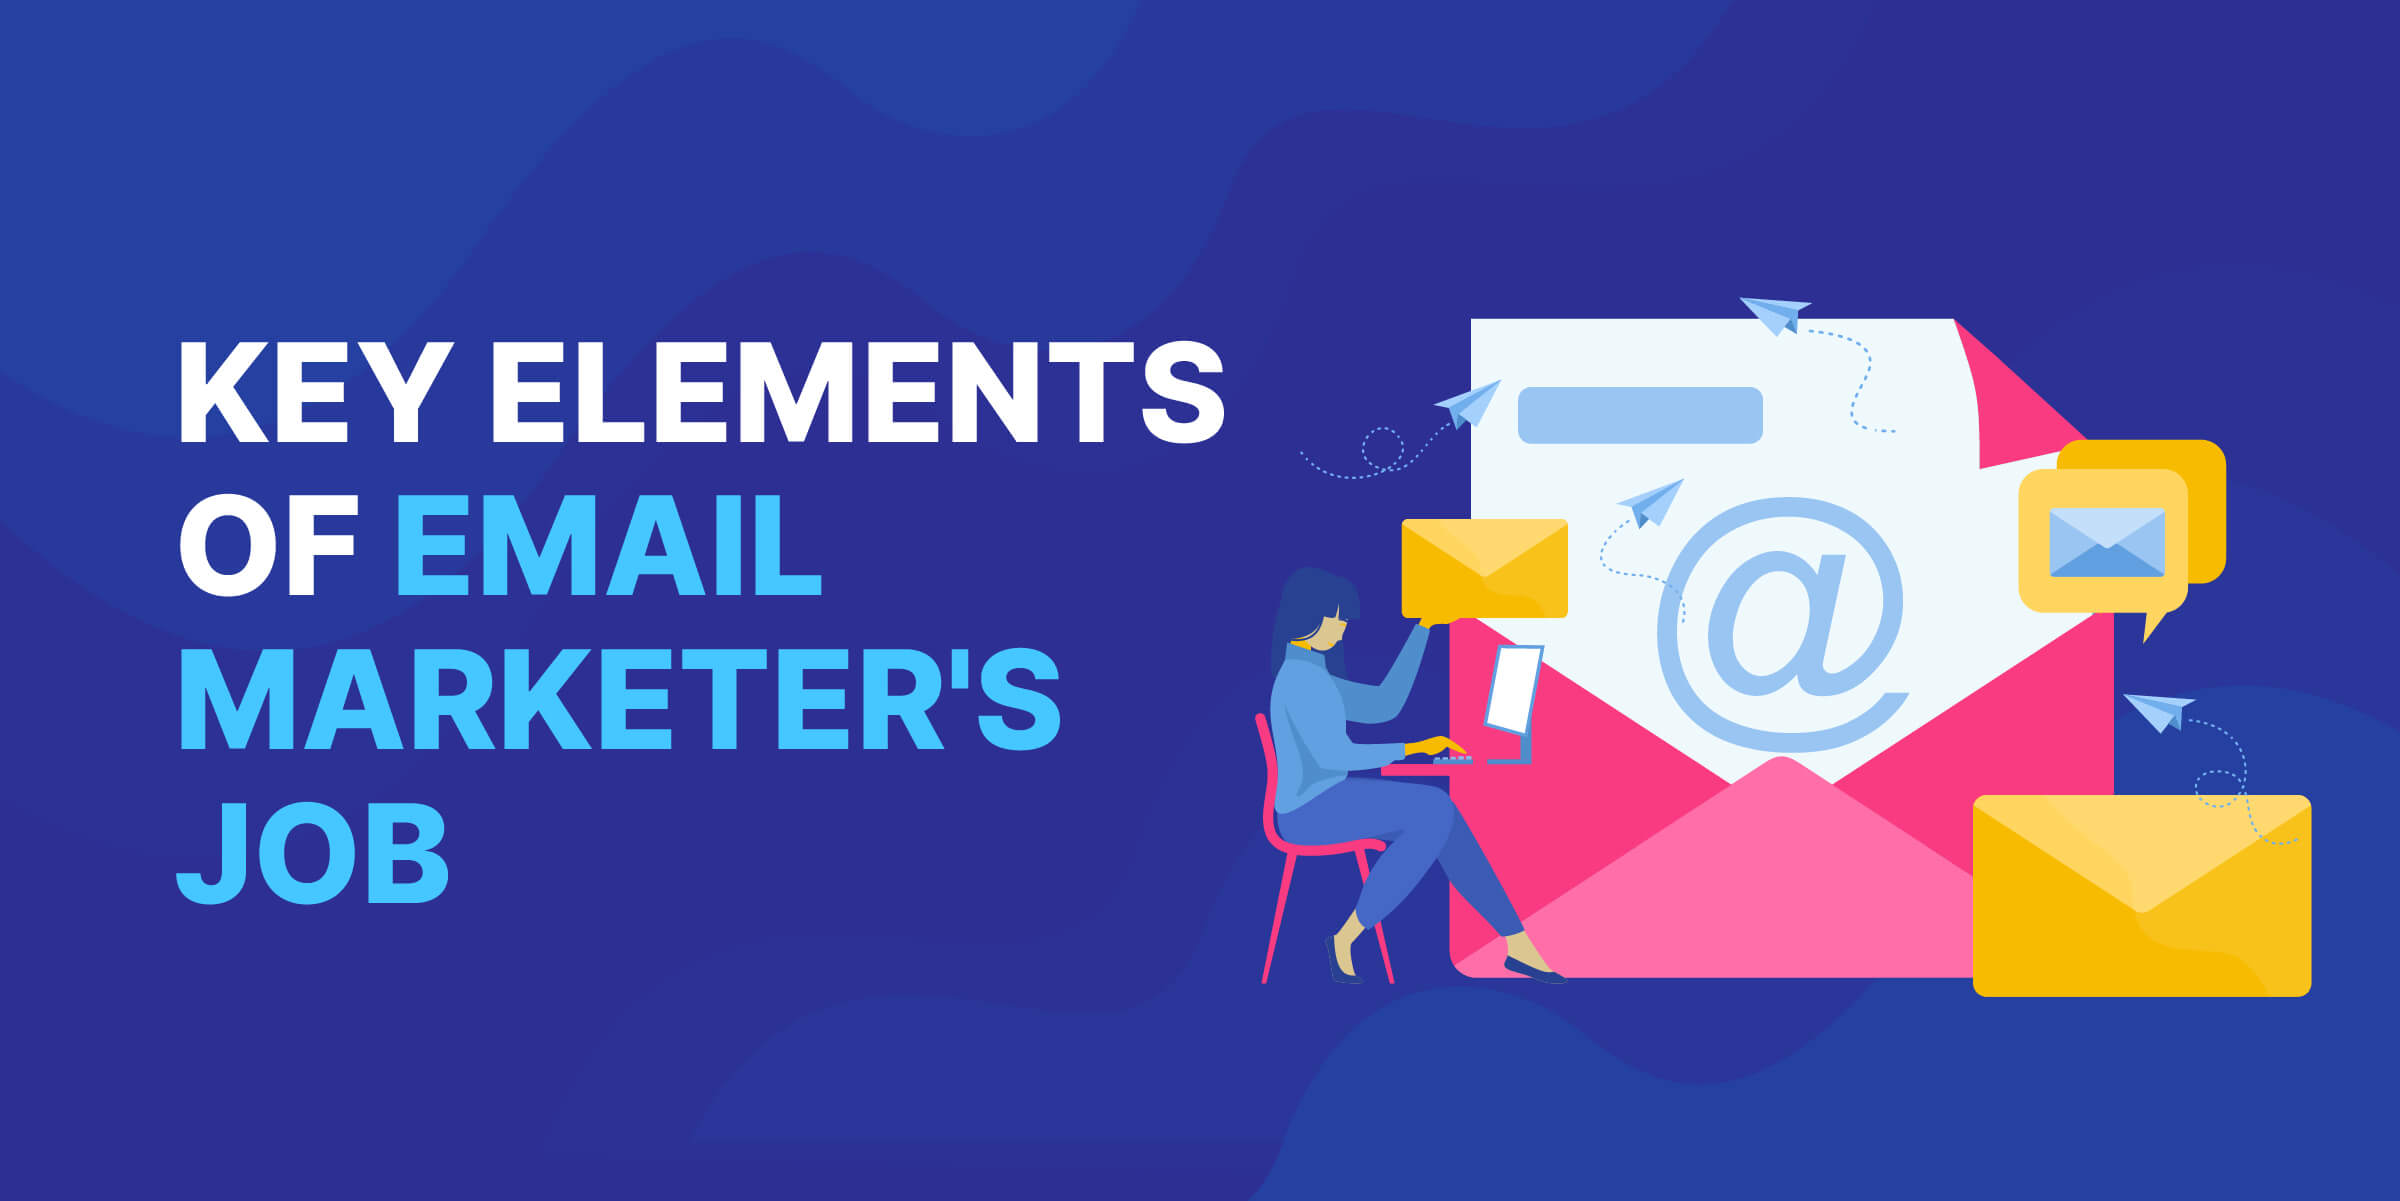 Key Elements of Email Marketer Job